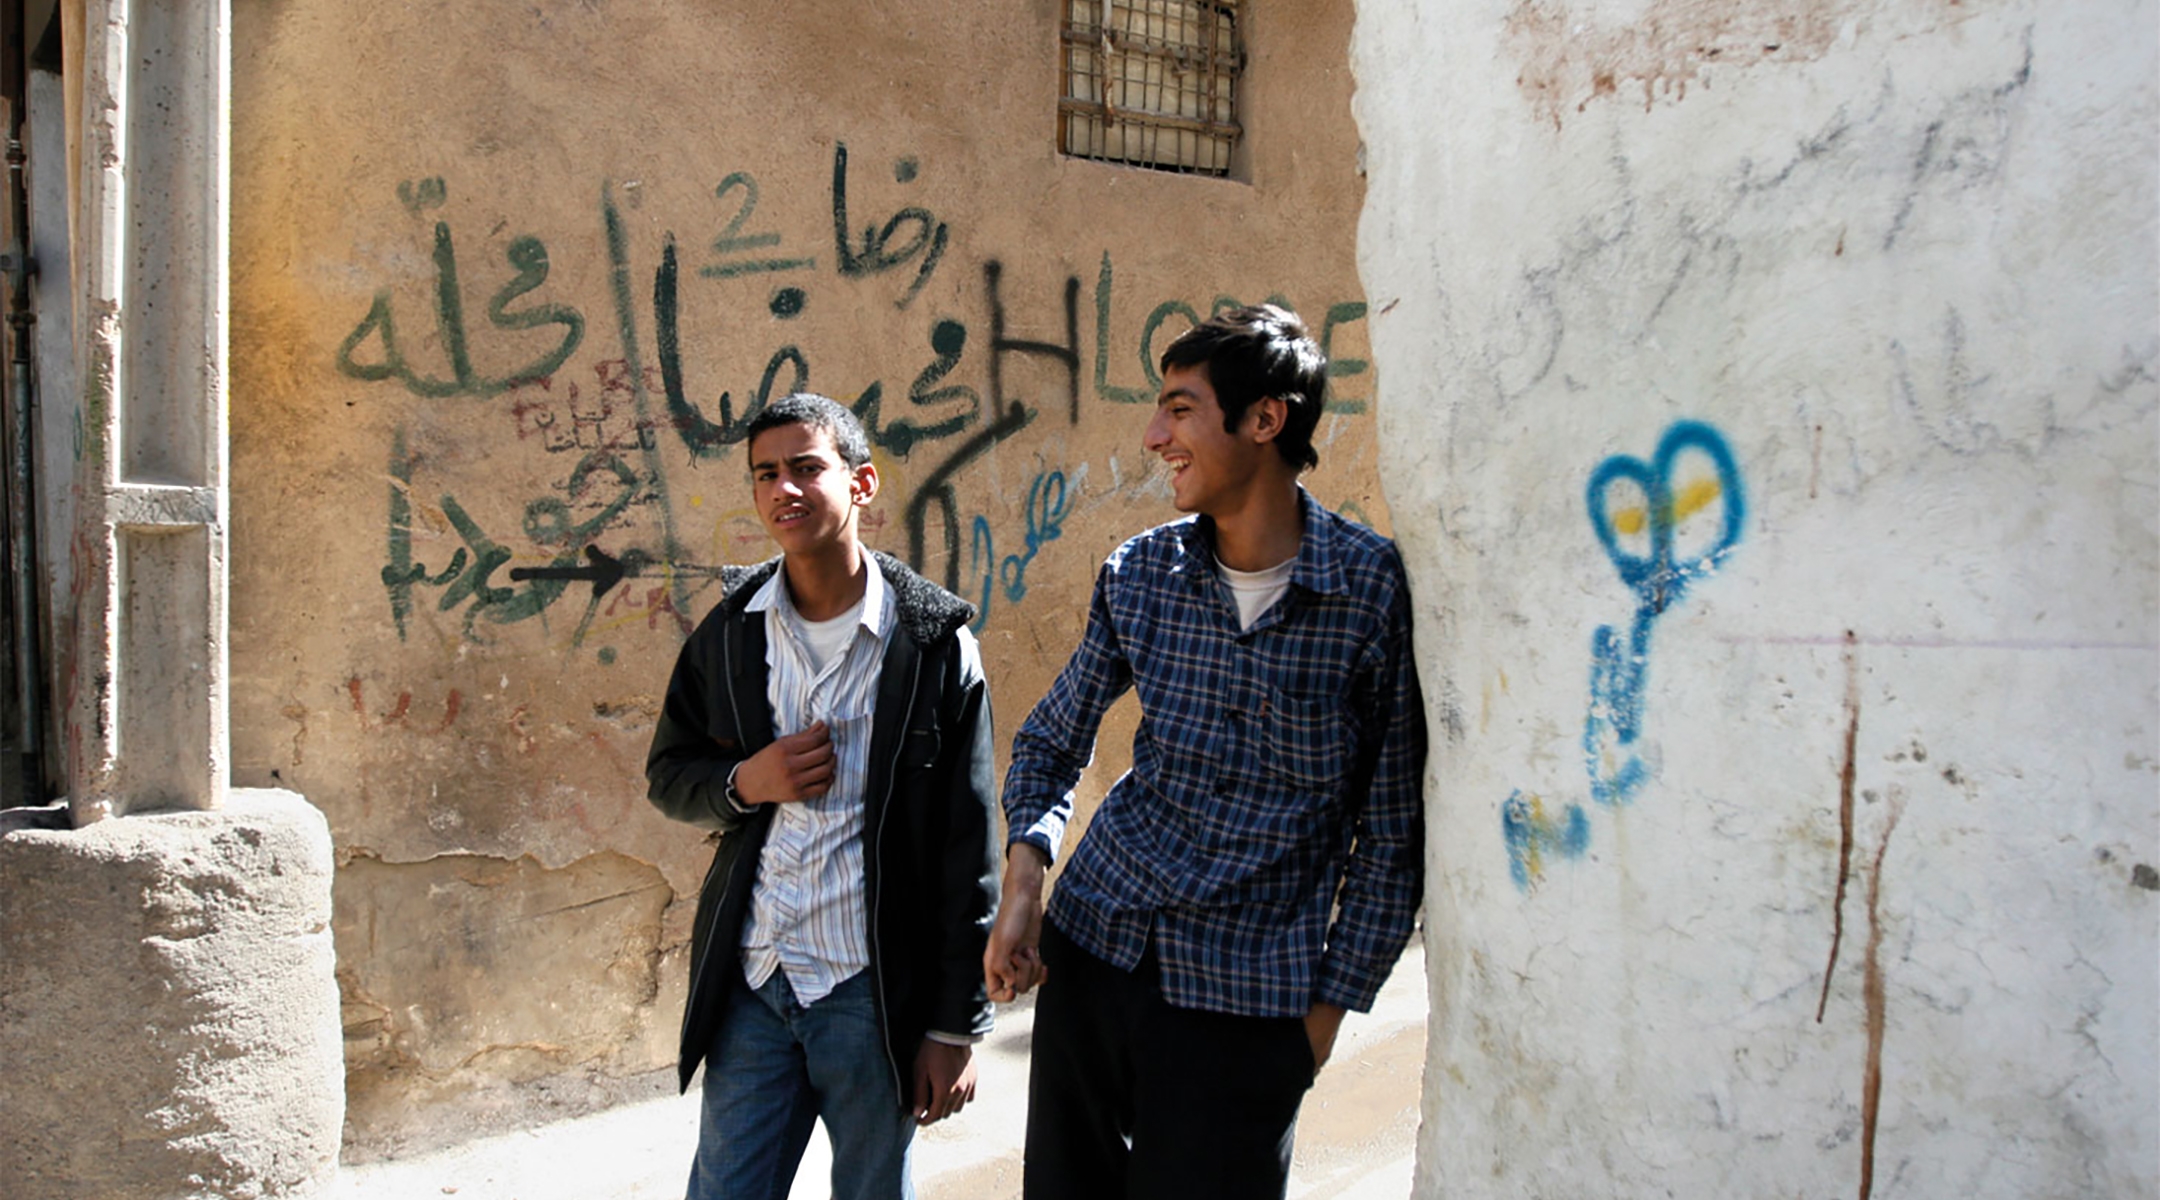 Two young men walk in a Jewish neighborhood in Shiraz, Iran. On the wall behind them, a derogatory term for Jews is written in graffiti. (Hassan Sarbakhsian)